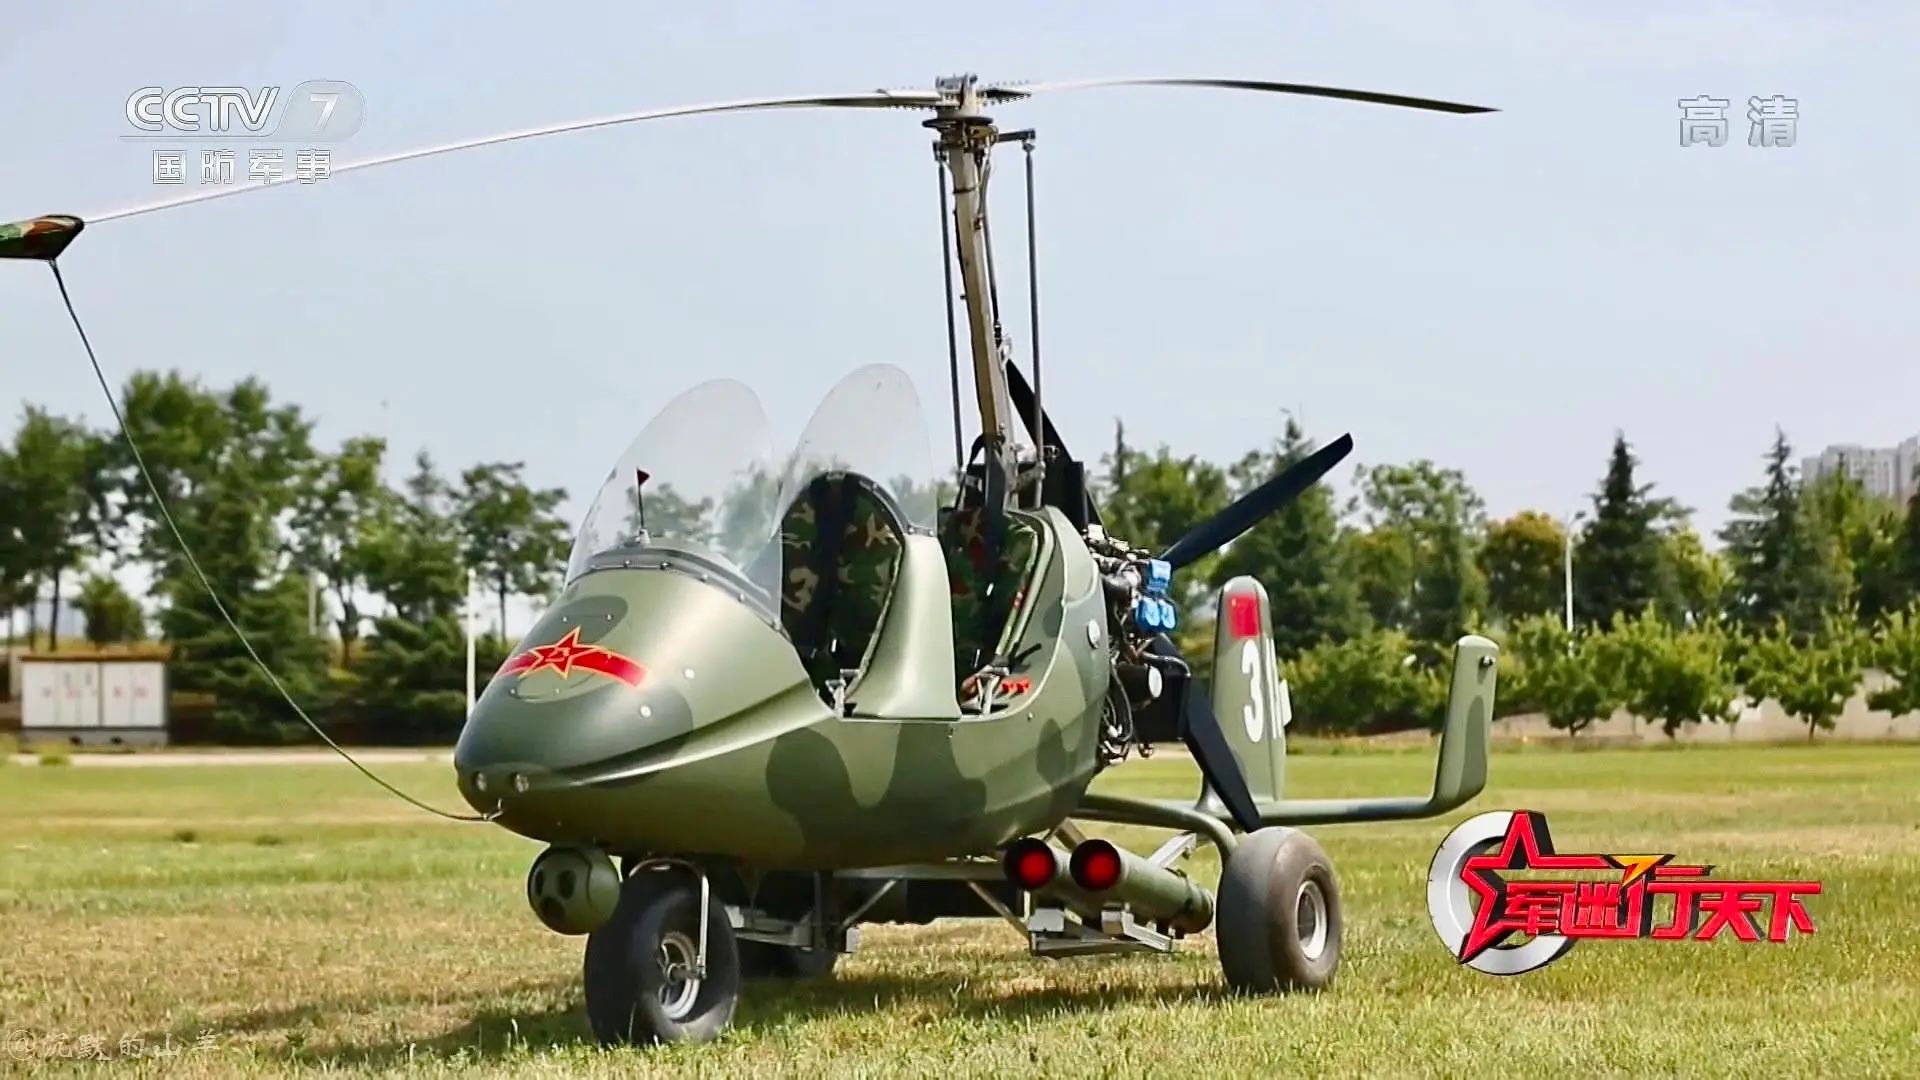 China unveiled a gyrocopter with anti-tank guided missiles